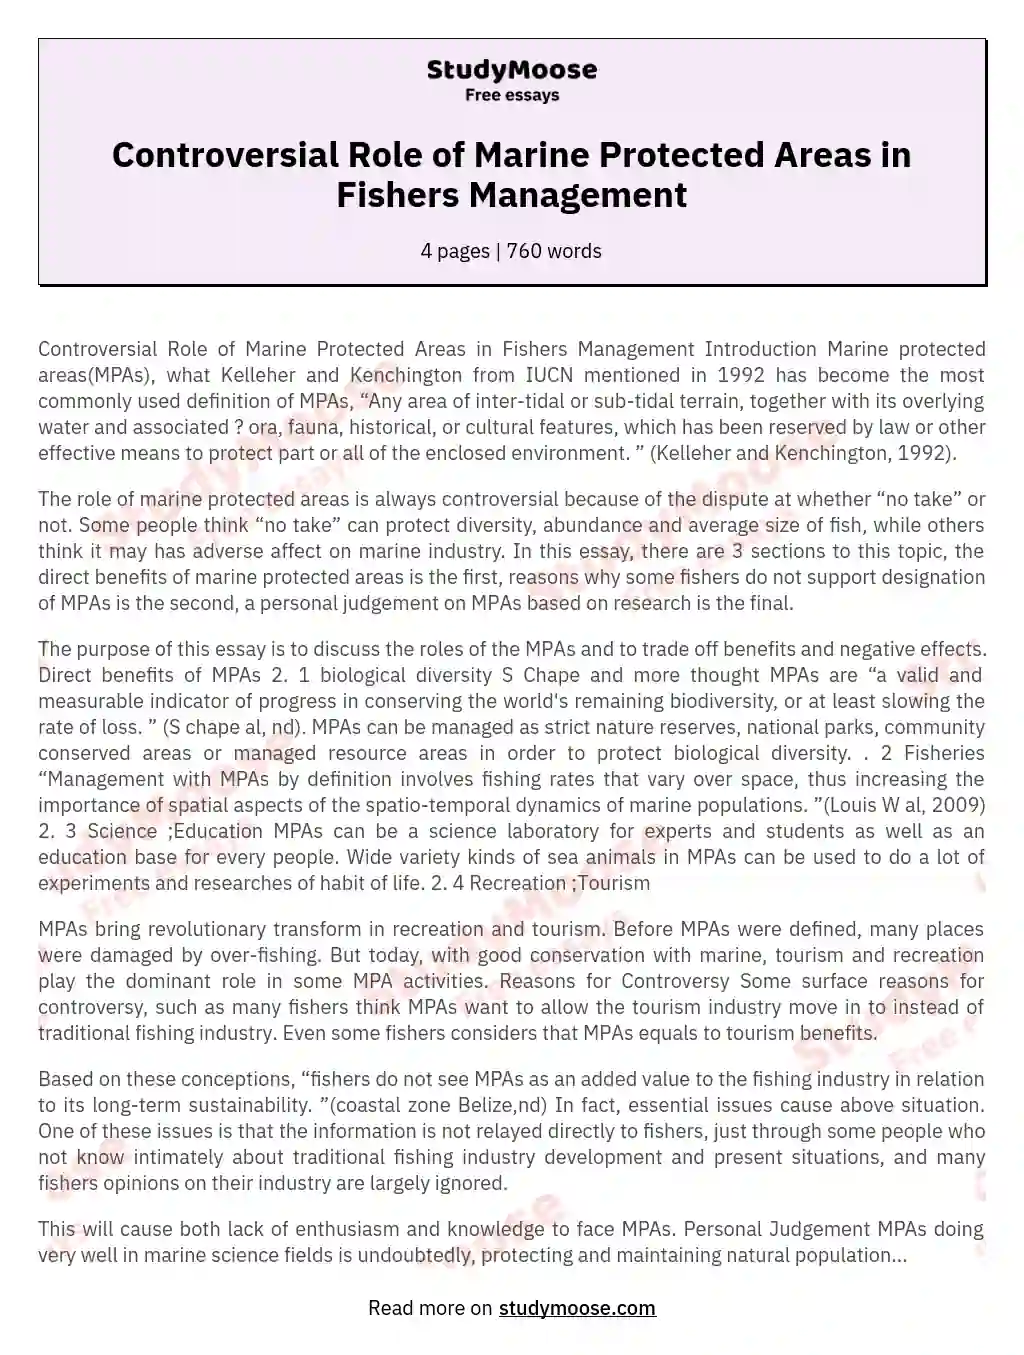 Controversial Role of Marine Protected Areas in Fishers Management essay